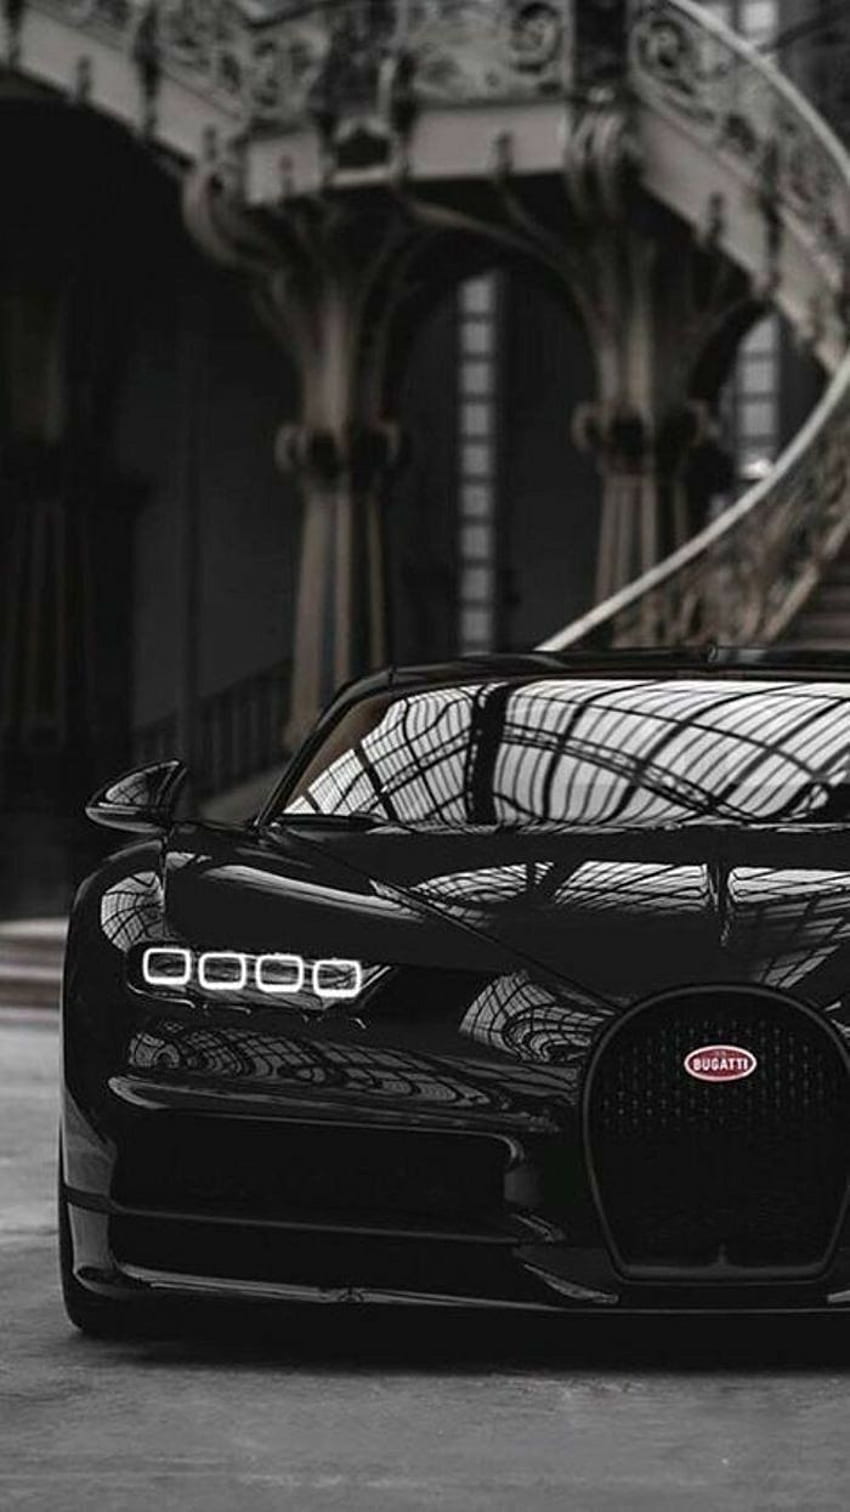 Black Bugatti Car with Aesthetic View. Cars bugatti veyron, Sports cars bugatti, Bugatti cars HD phone wallpaper